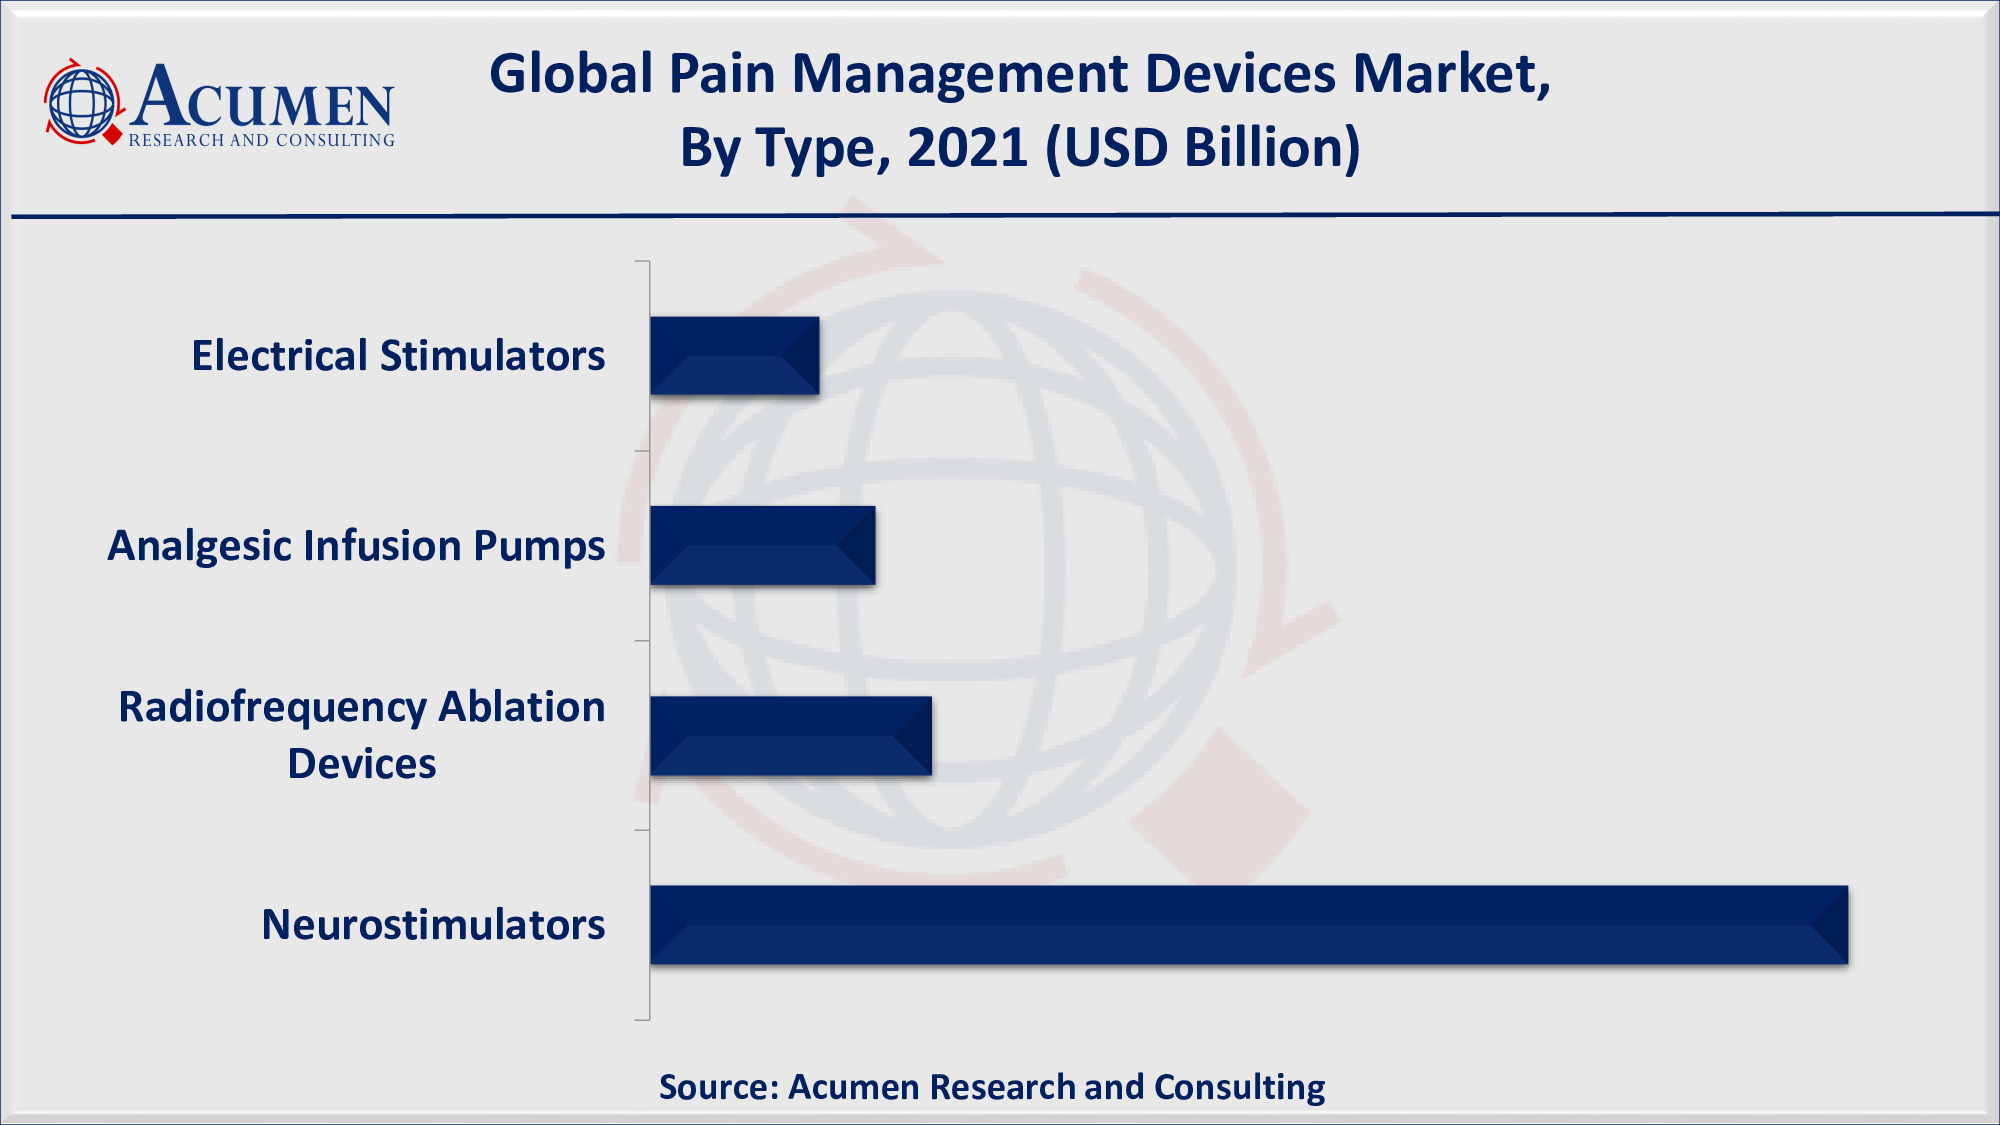 Based on type, neurostimulation devices accounted for over 60% of the overall market share in 2021